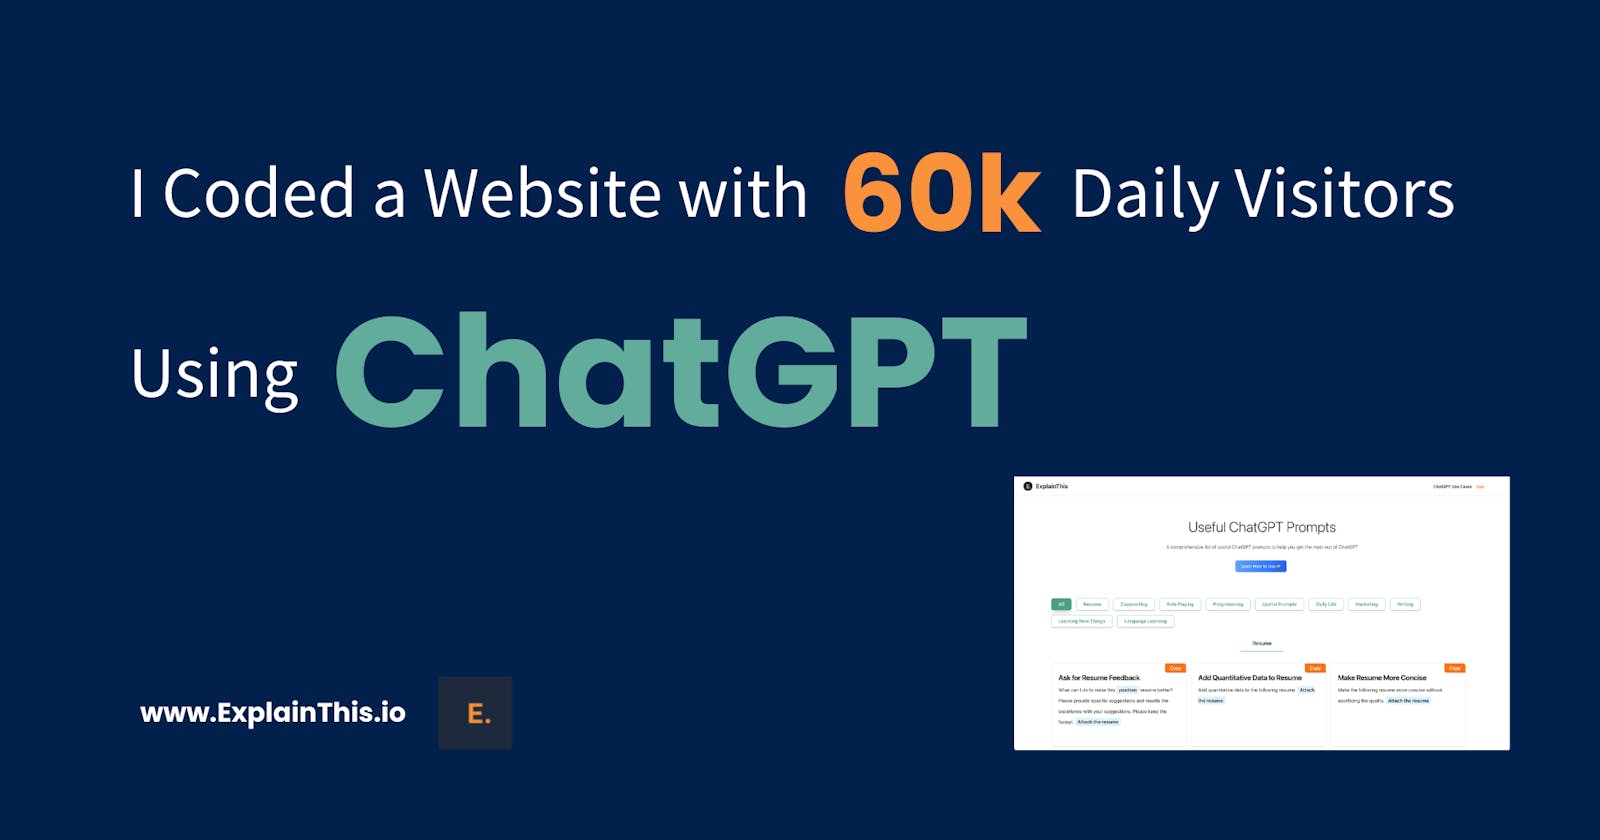 I Coded a Website with 60k+ Daily Visitors Using ChatGPT